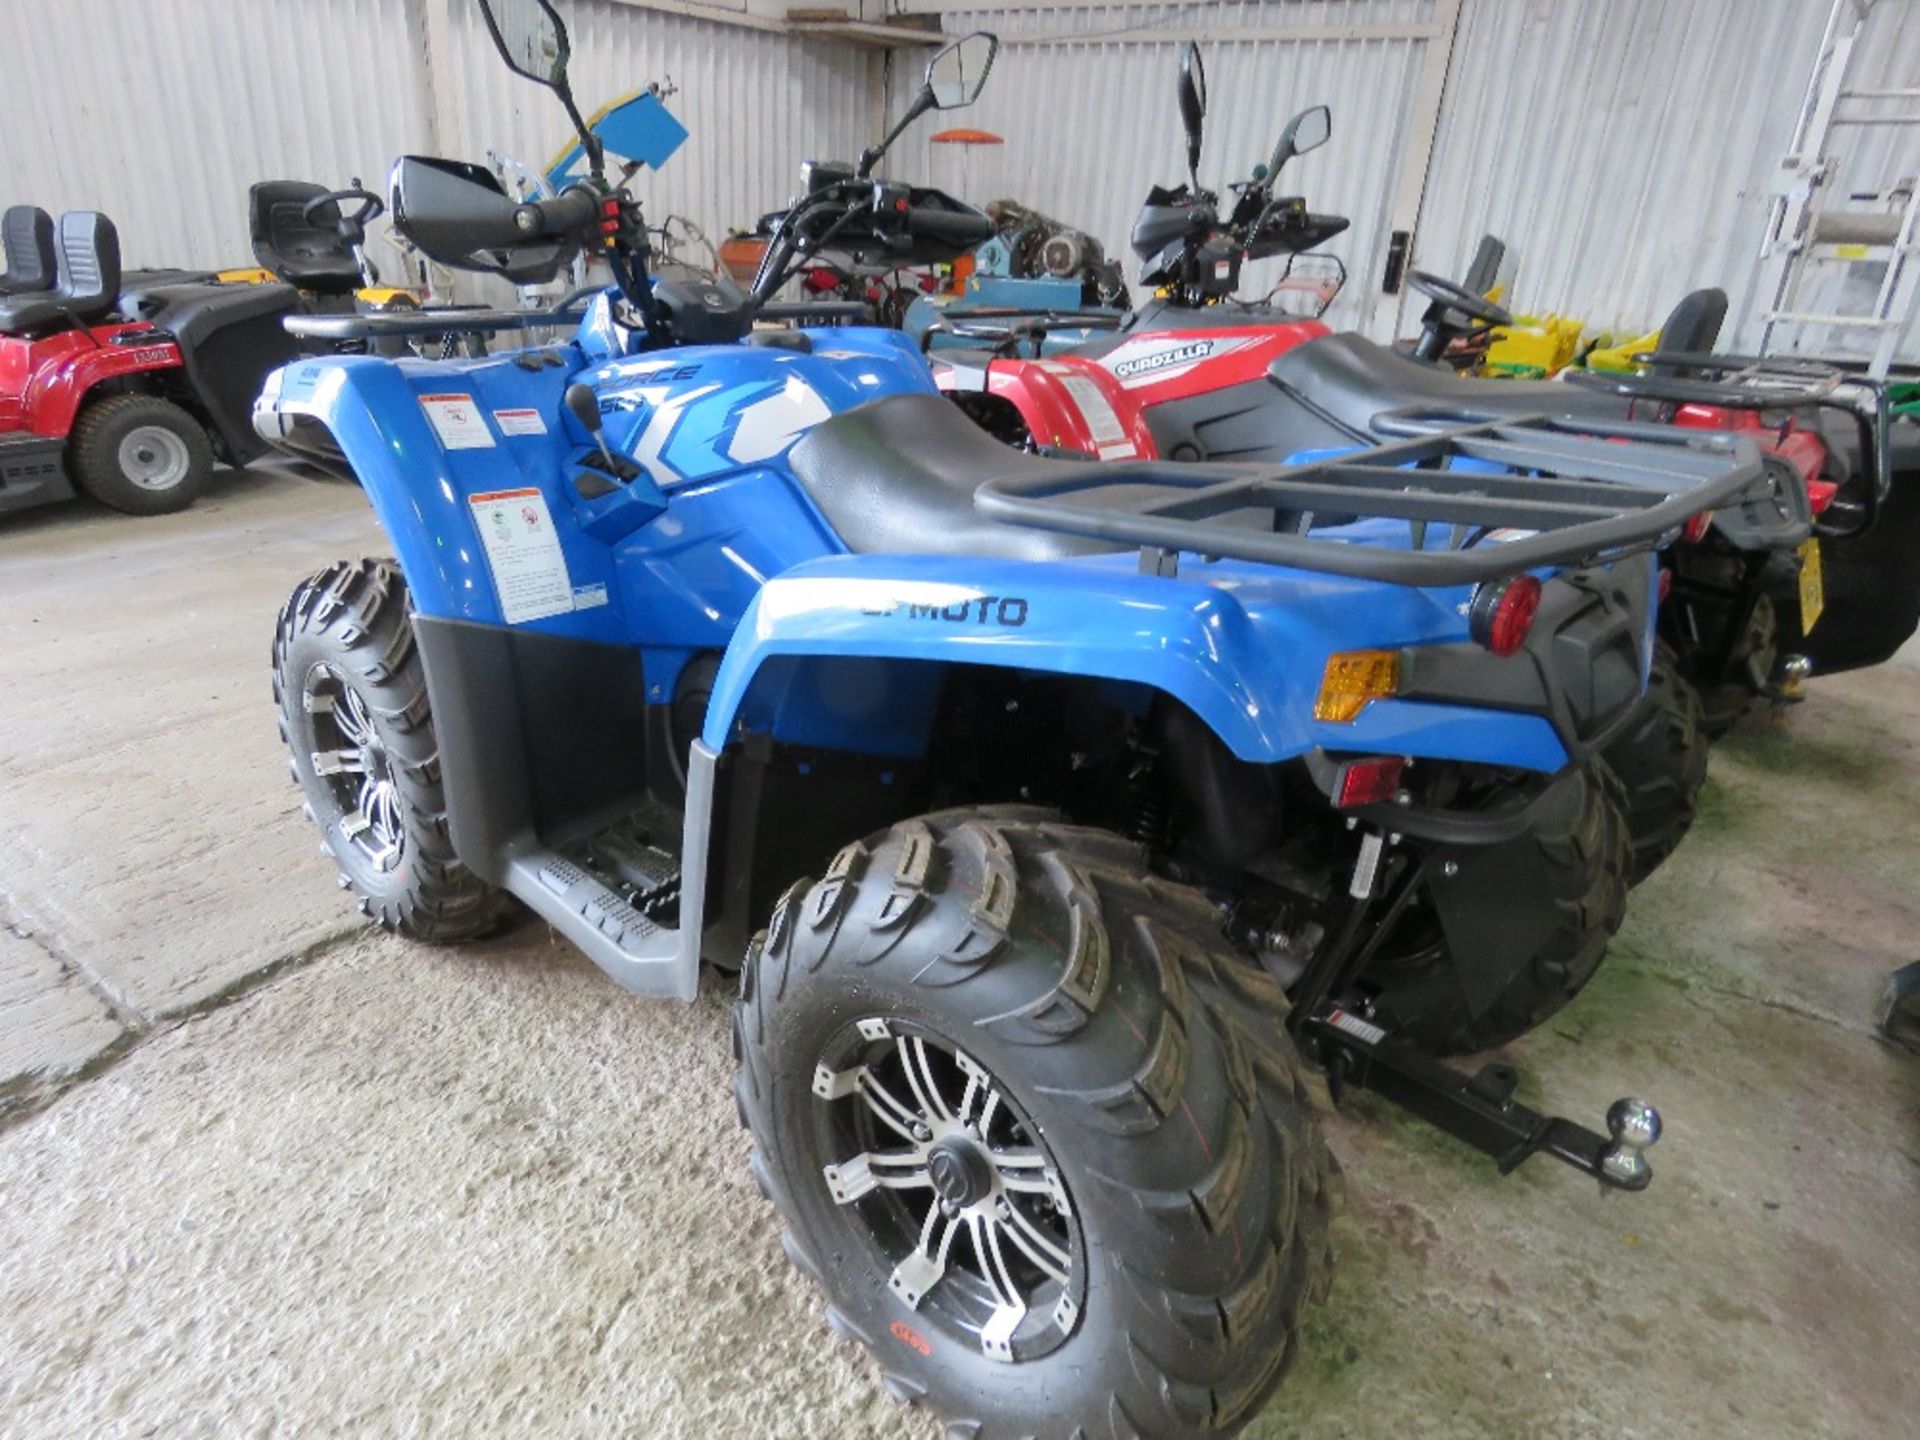 CFMOTO/QUADZILLA 450 4WD QUAD BIKE 4WD WITH WINCH. 7.8 REC MILES. WHEN TESTED WAS SEEN TO DRIVE, STE - Image 5 of 8